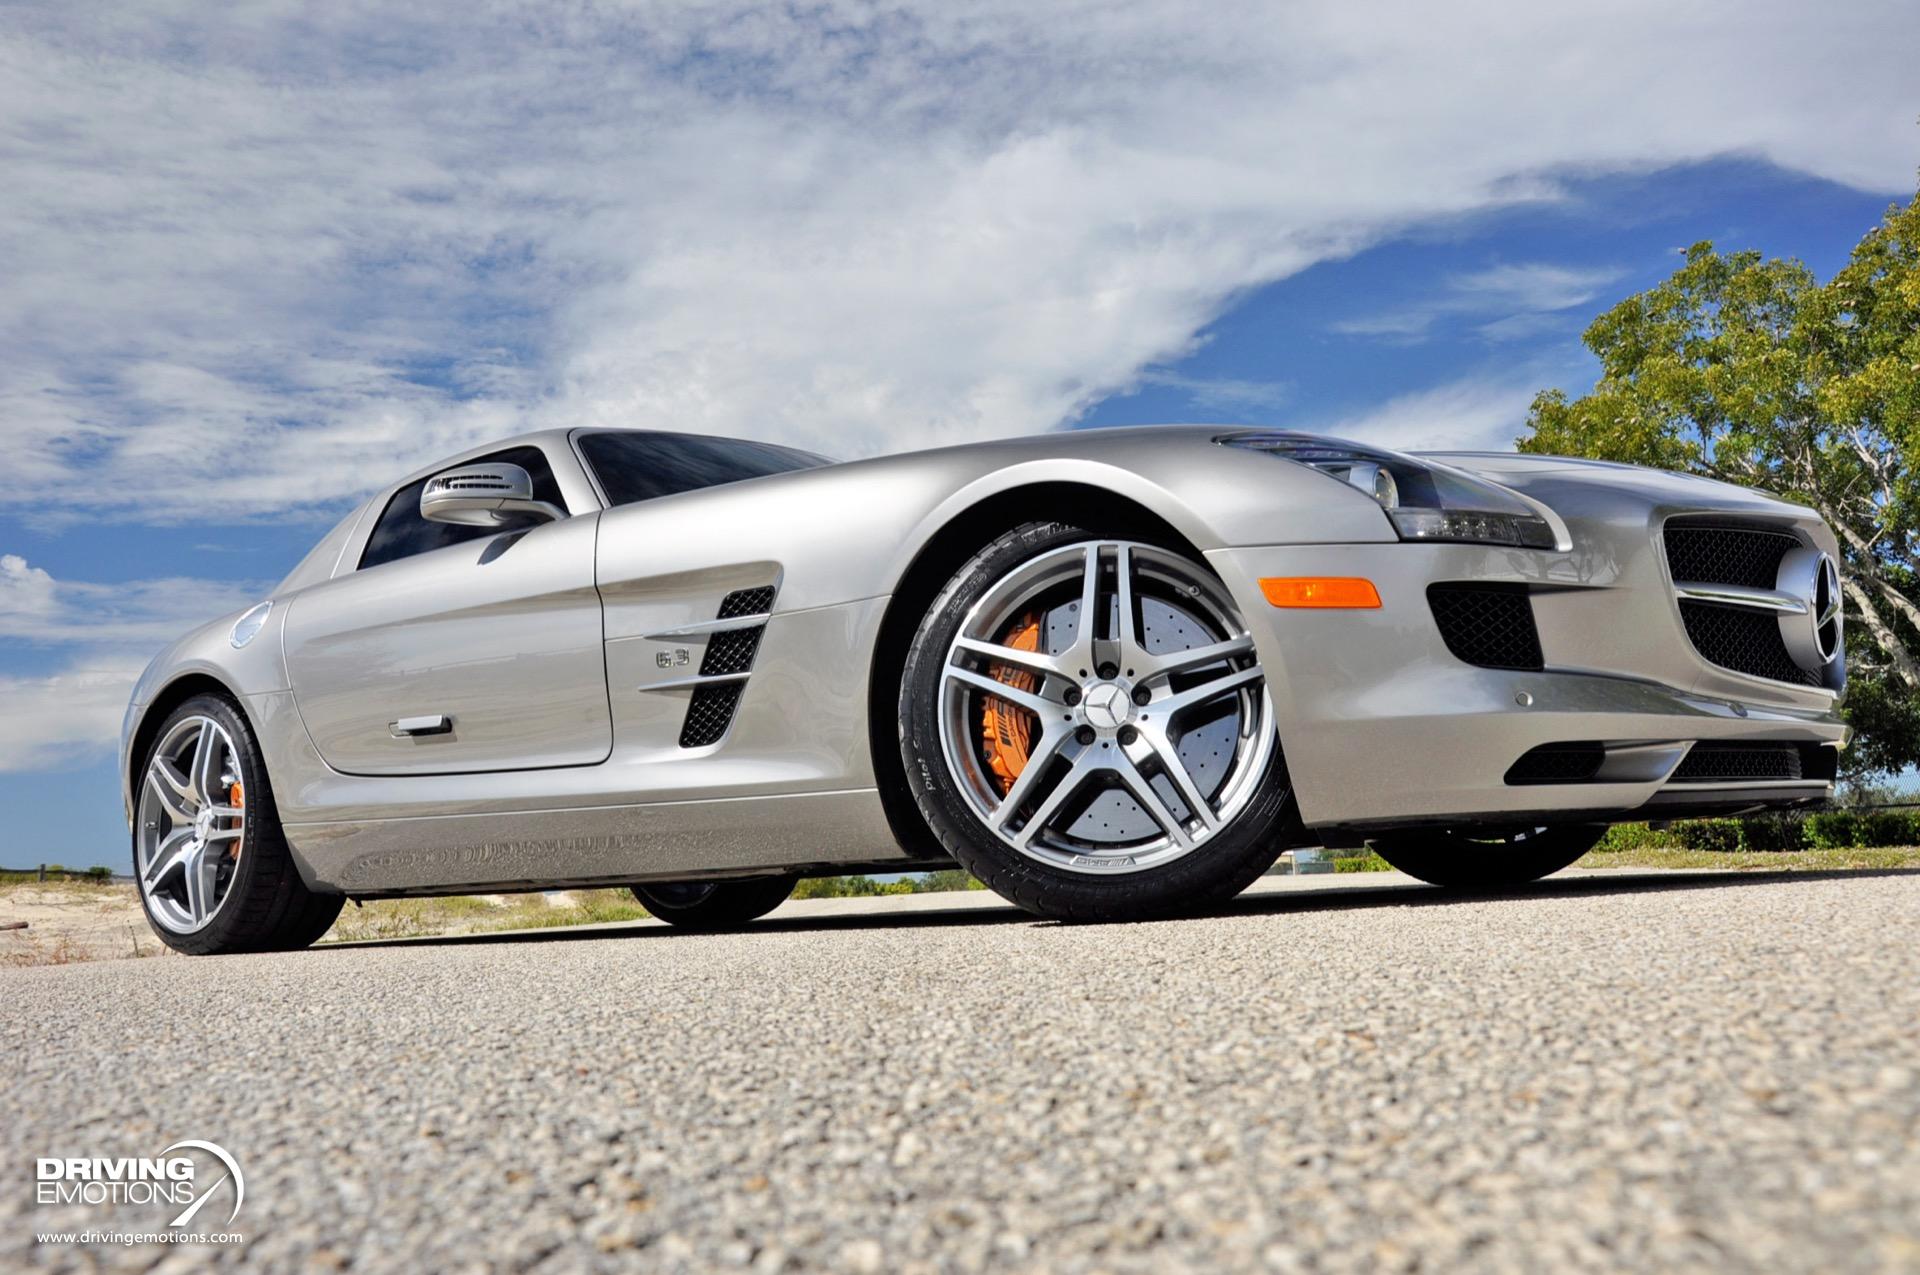 Used 2011 Mercedes-Benz SLS AMG GULLWING! ALUBEAM SILVER/RED! CARBON! COLLECTOR!! | Lake Park, FL